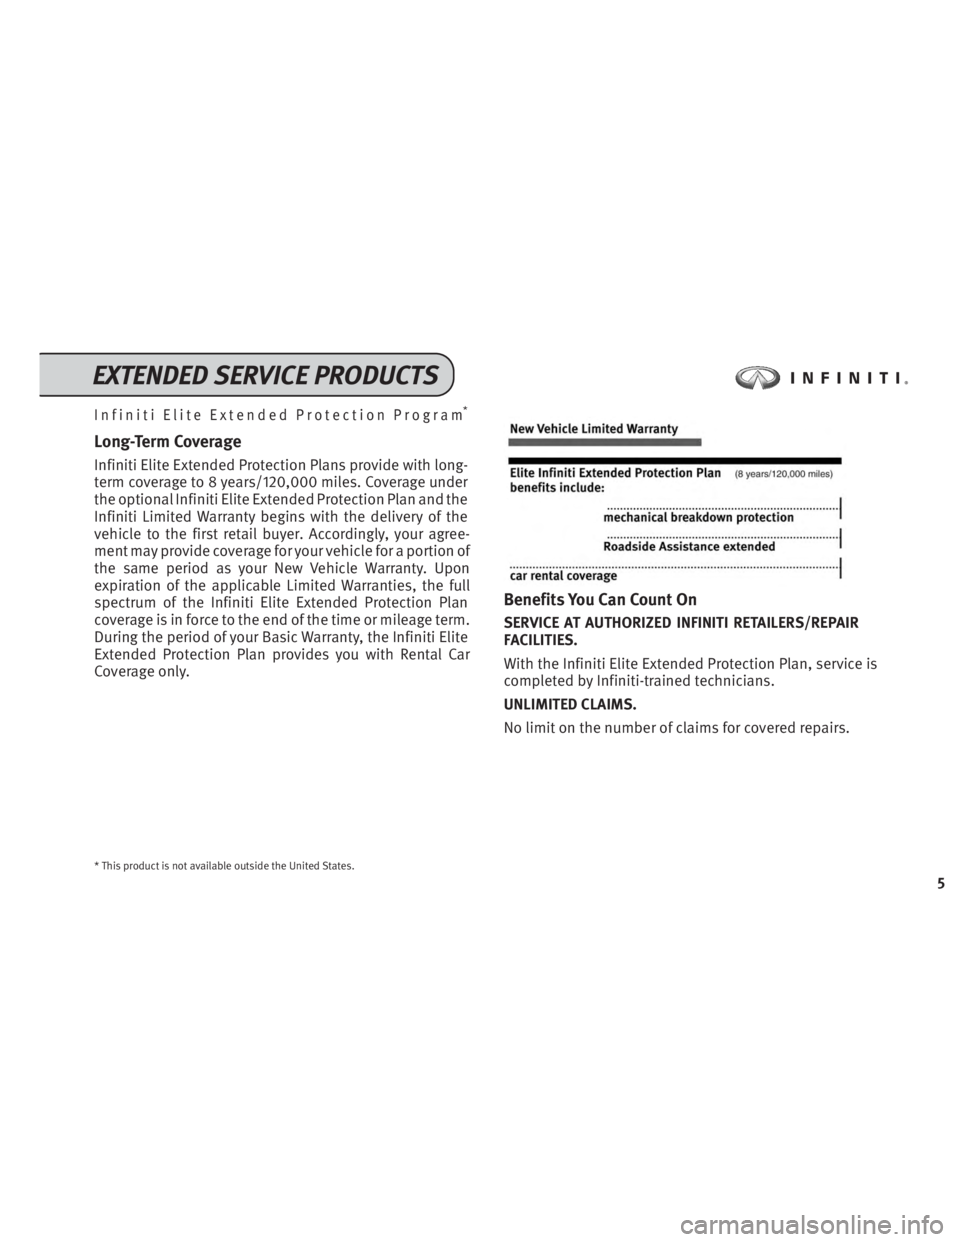 INFINITI QX80 2014  Service And Maintenance Guide Infiniti Elite Extended Protection Program*
Long-Term Coverage
Infiniti Elite Extended Protection Plans provide with long-
term coverage to 8 years/120,000 miles. Coverage under
the optional Infiniti 